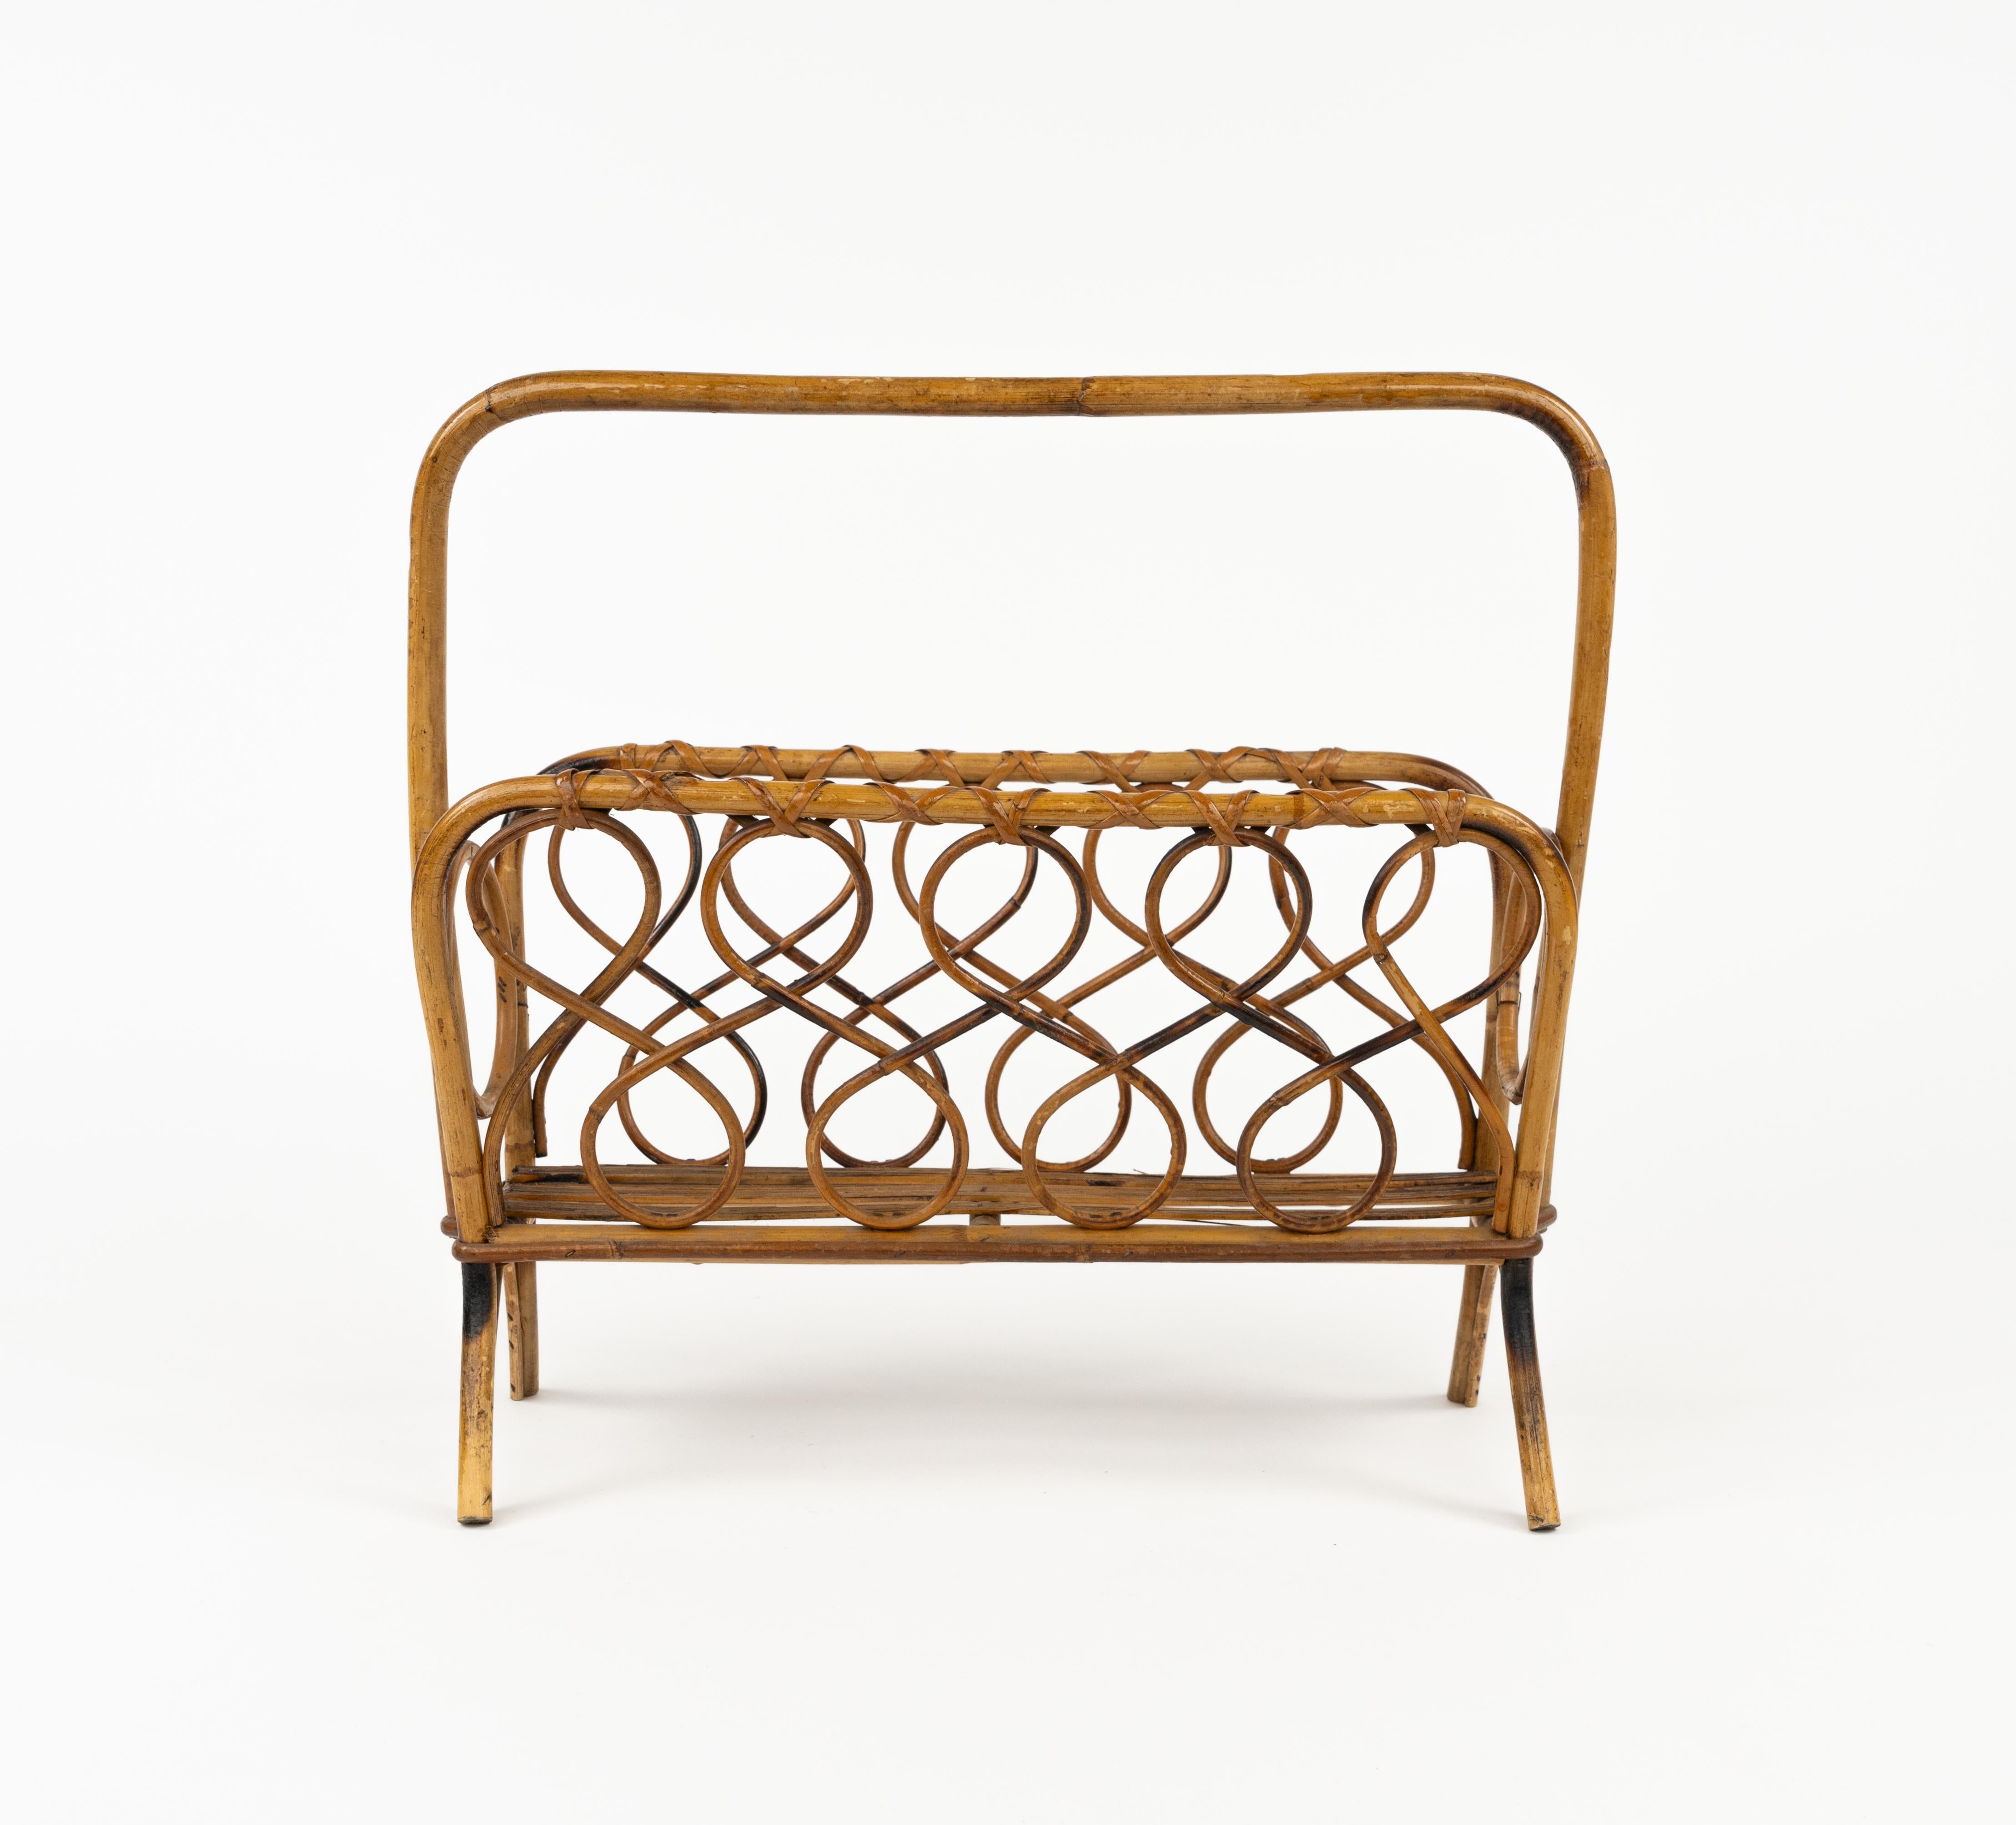 Midcentury beautiful magazine rack in bamboo and rattan.

Made in Italy in the 1960s. 